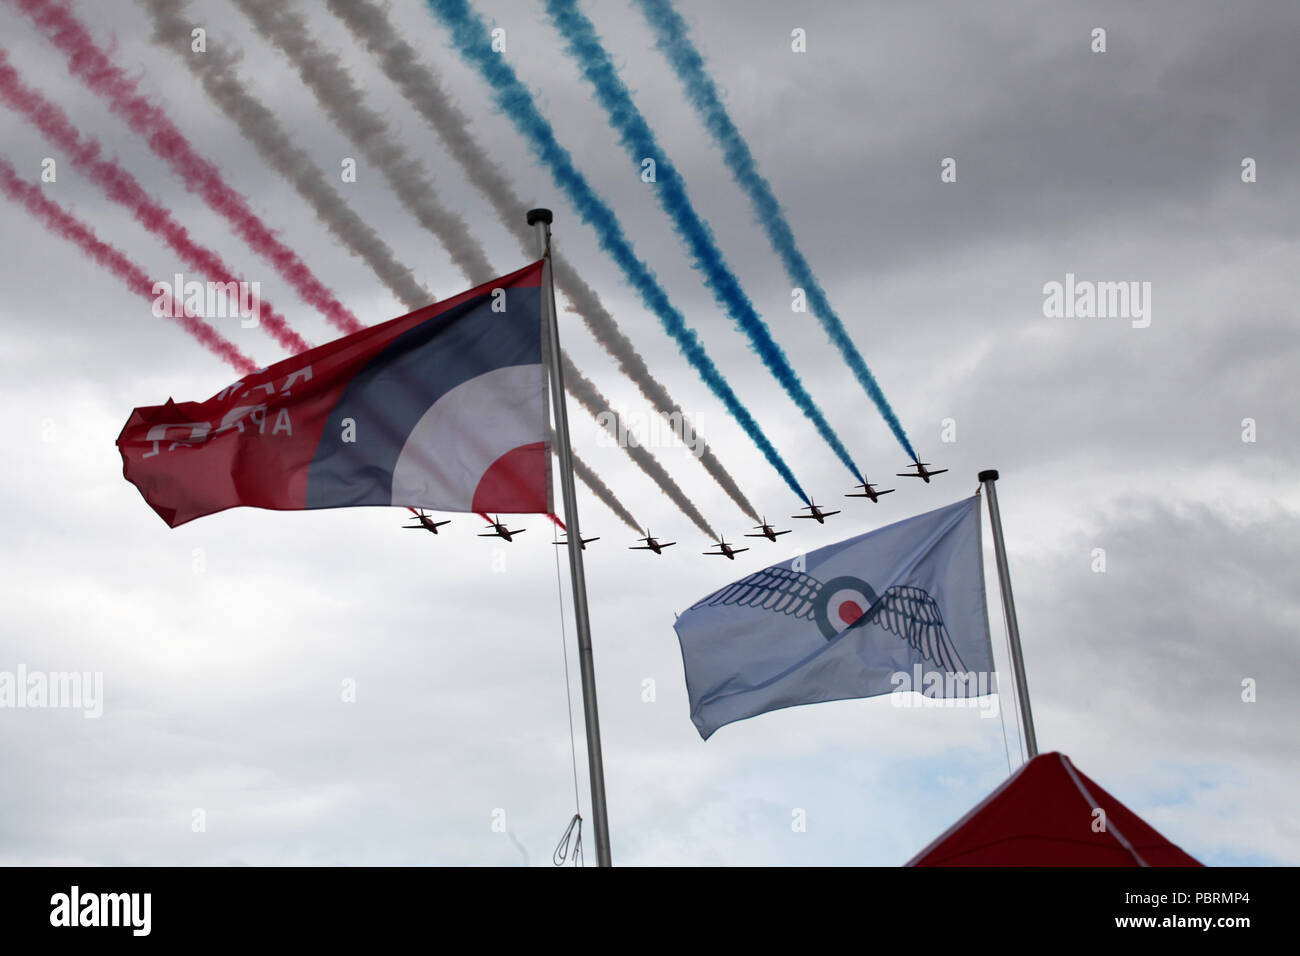 Framed by flags the Red Arrows make a flypast at Scotland's national airshow held at the national museum of flight, East Fortune near Edinburgh Stock Photo